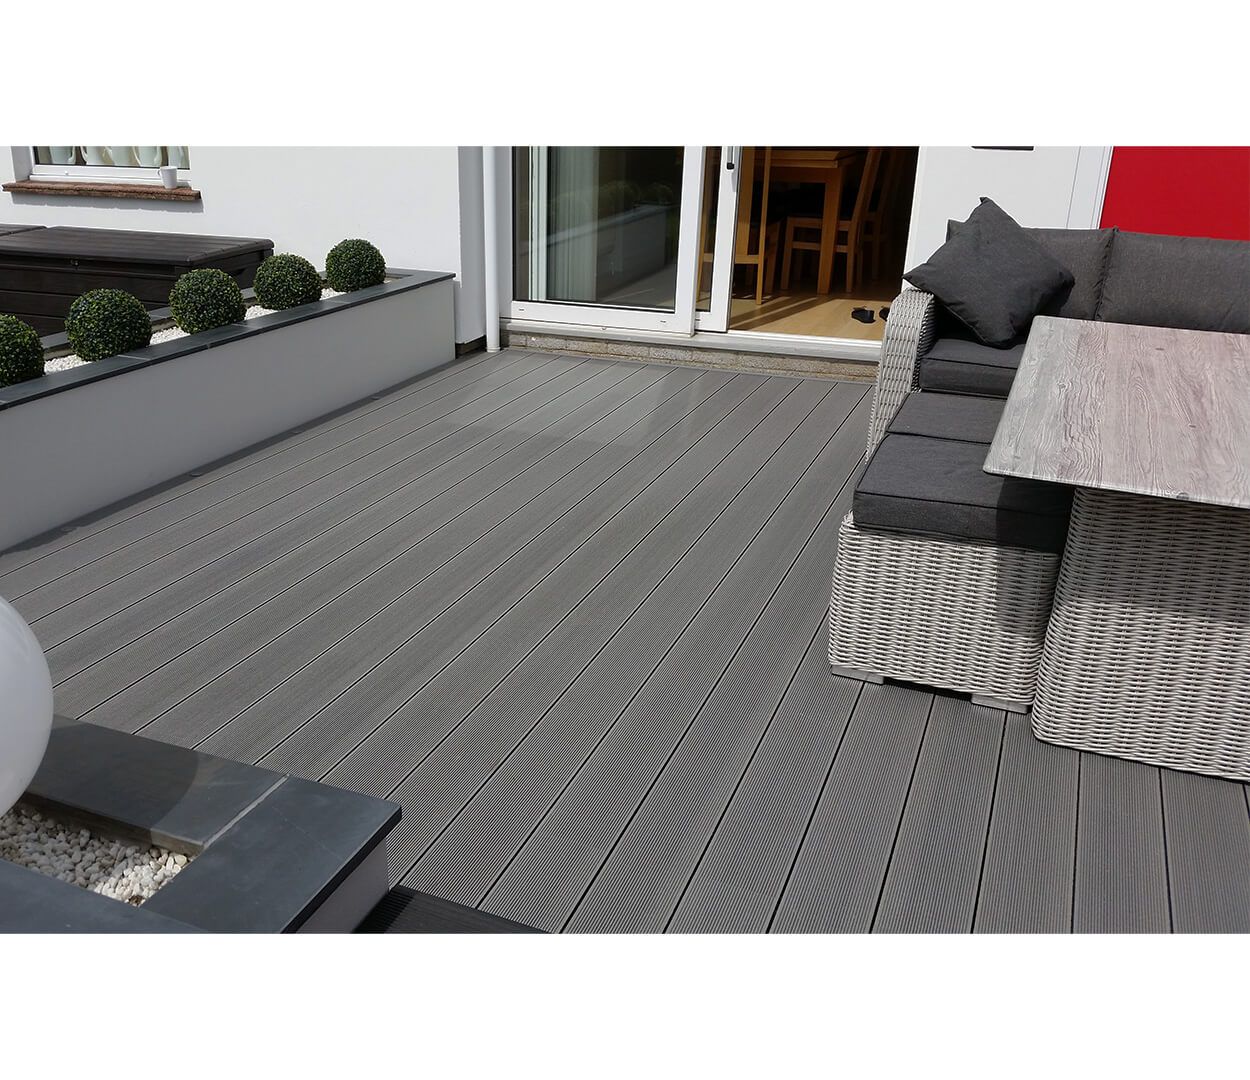 Cladco Stone Grey Composite Decking used in garden.